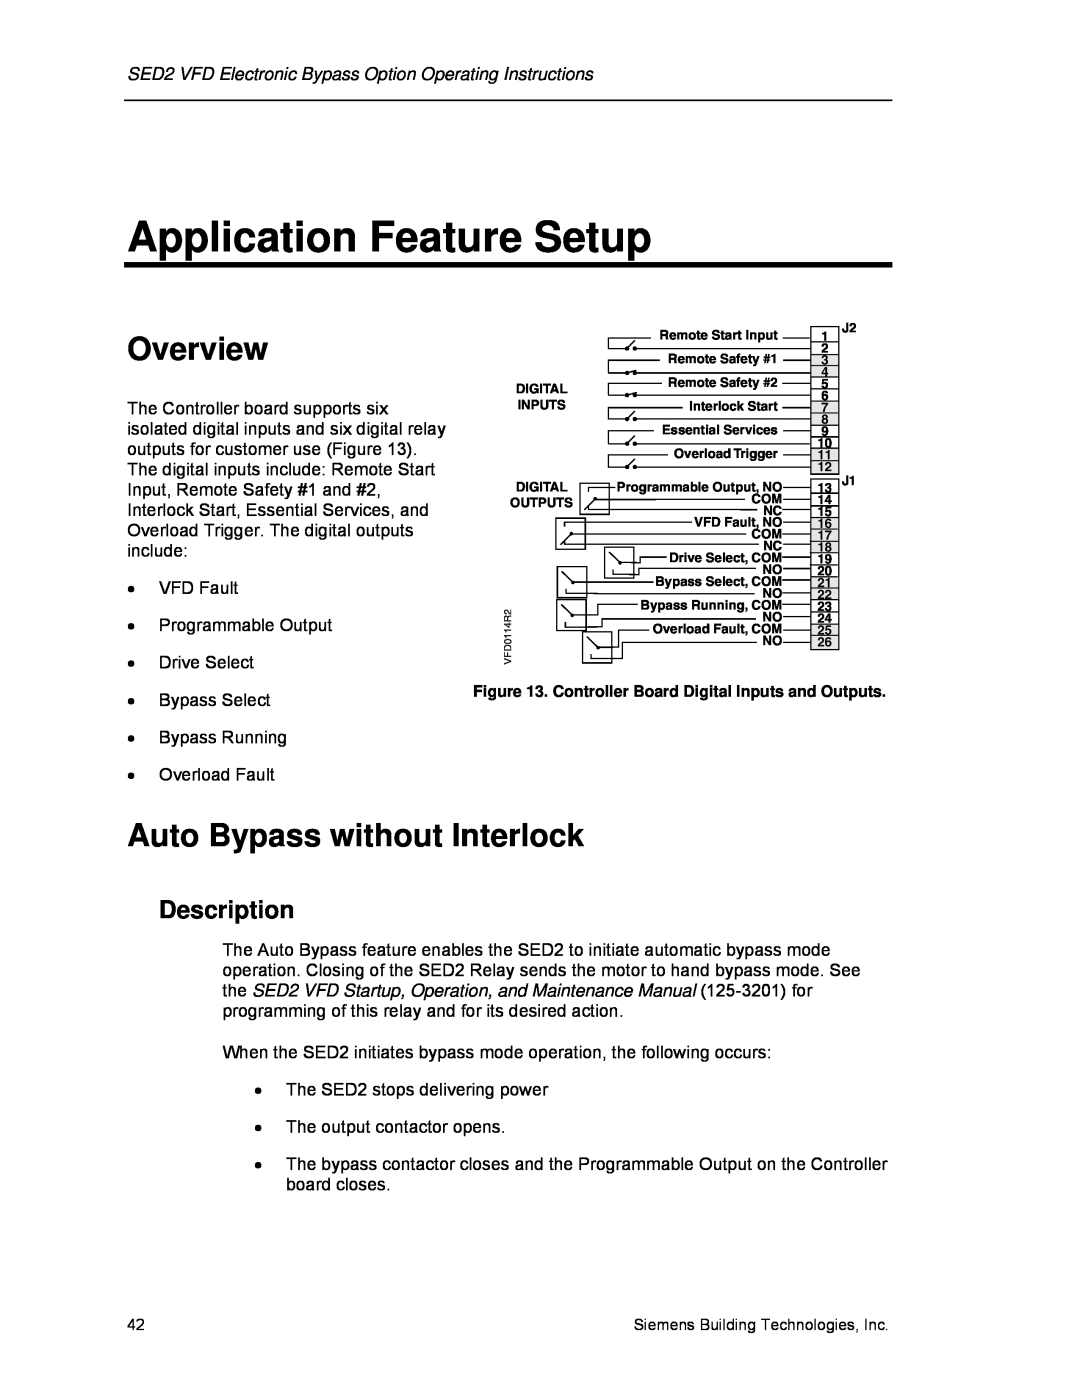 Siemens 125-3208 operating instructions Application Feature Setup, Overview, Auto Bypass without Interlock, Description 